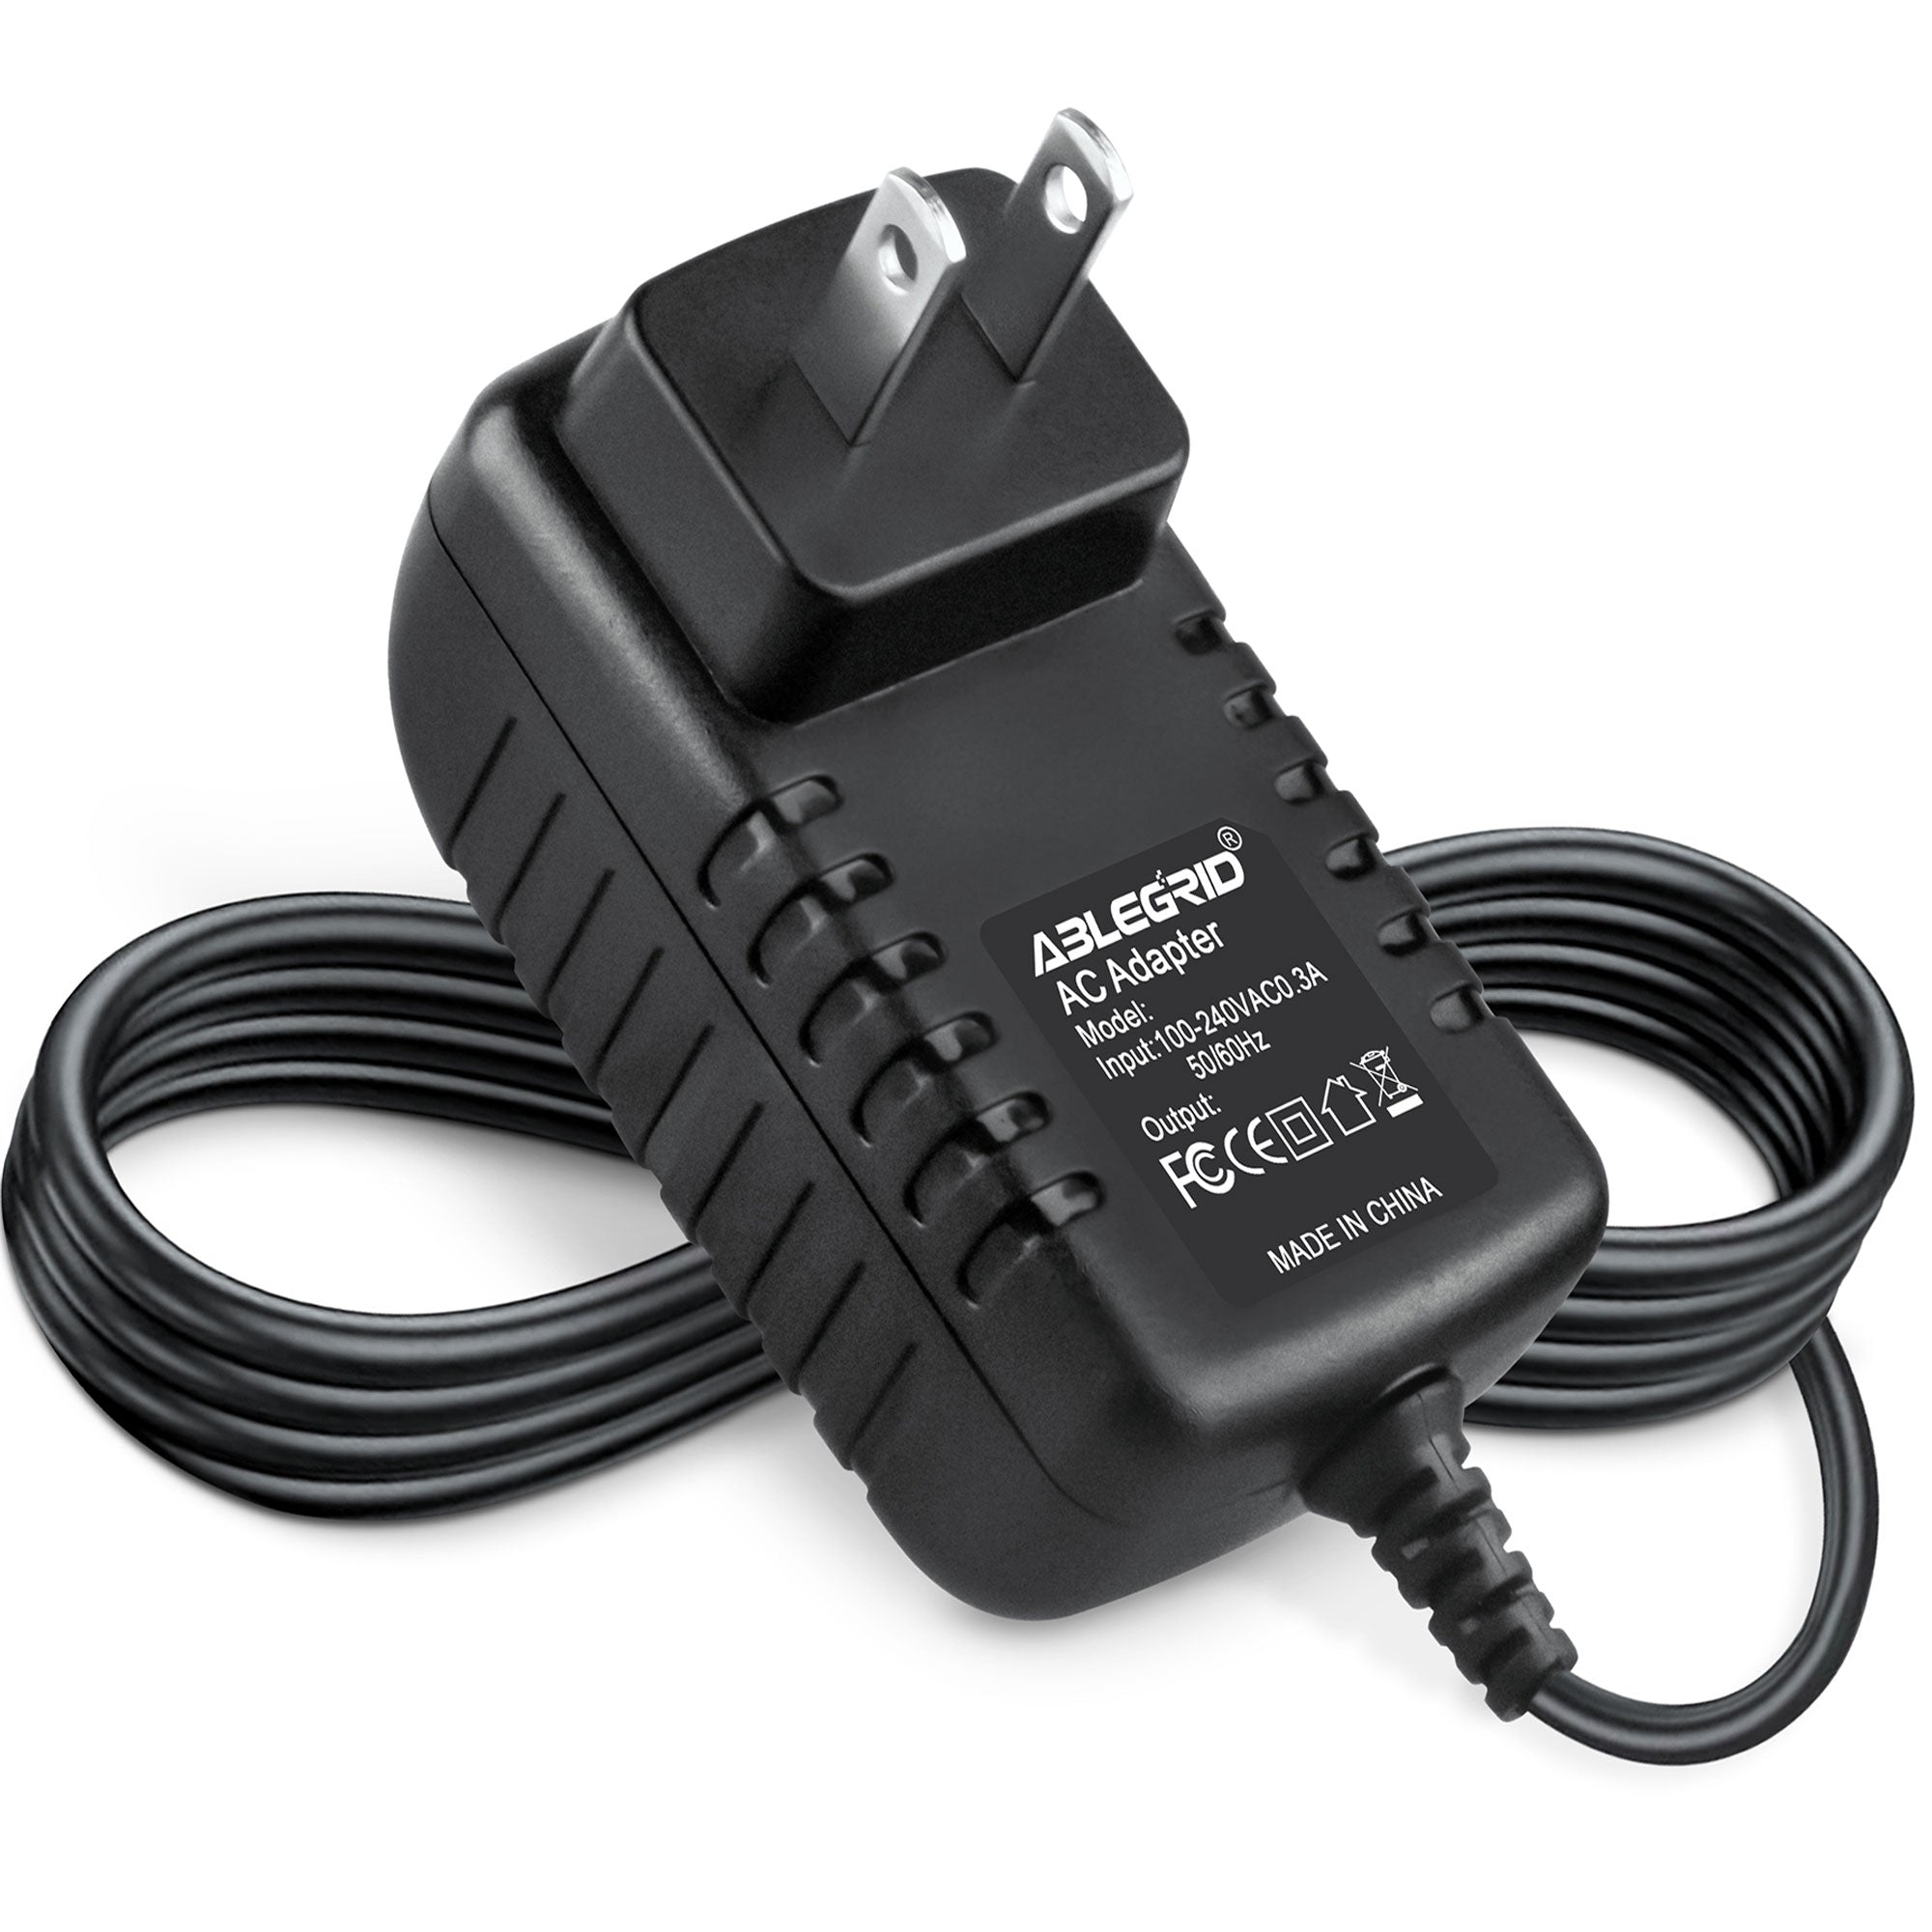 AbleGrid AC / DC Adapter for 90500932 Model: ETPCA-180021U3 Class 2 Power Supply Cord Cable Charger Input: 100 - 240 VAC Worldwide Use Mains PSU